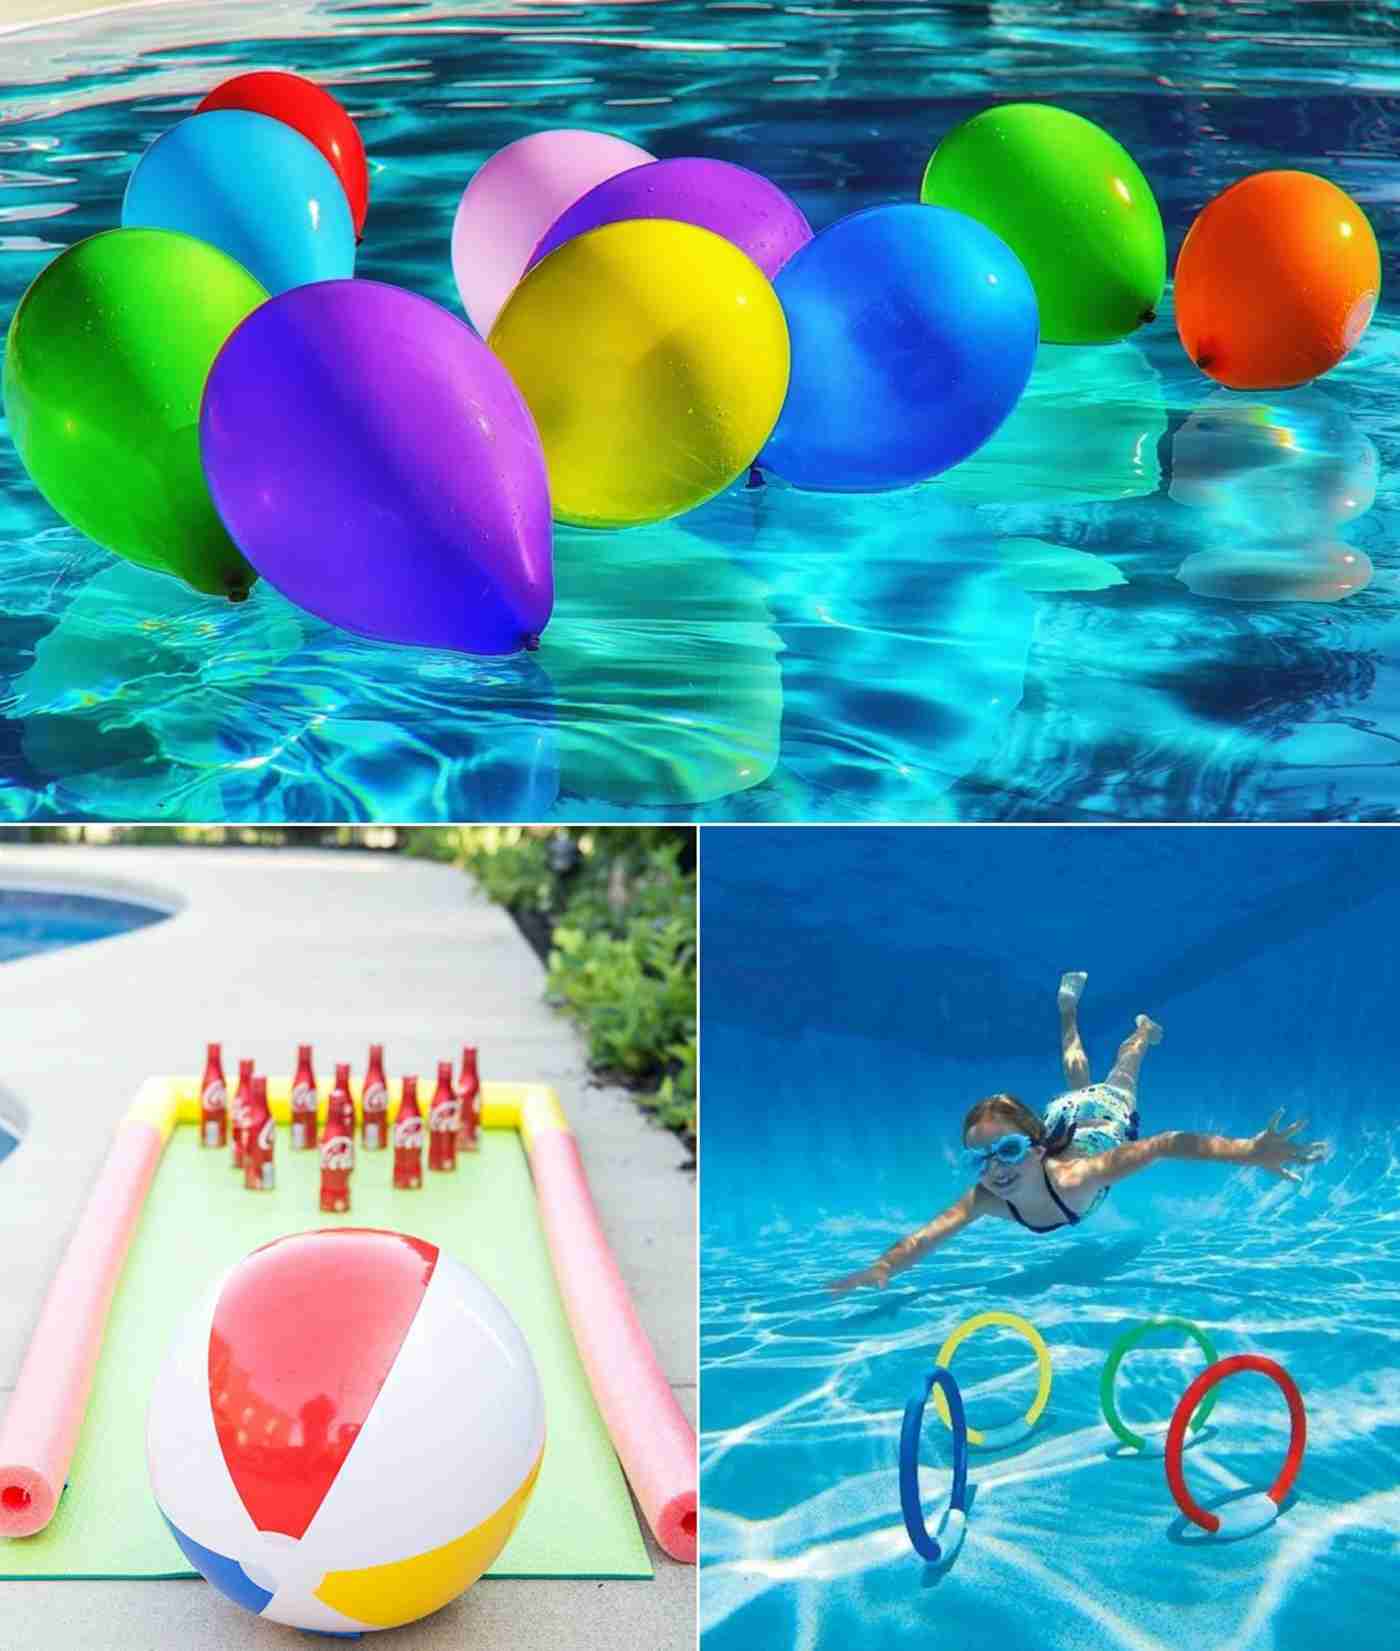 Some fun game ideas for the pool party for kids with water bombs